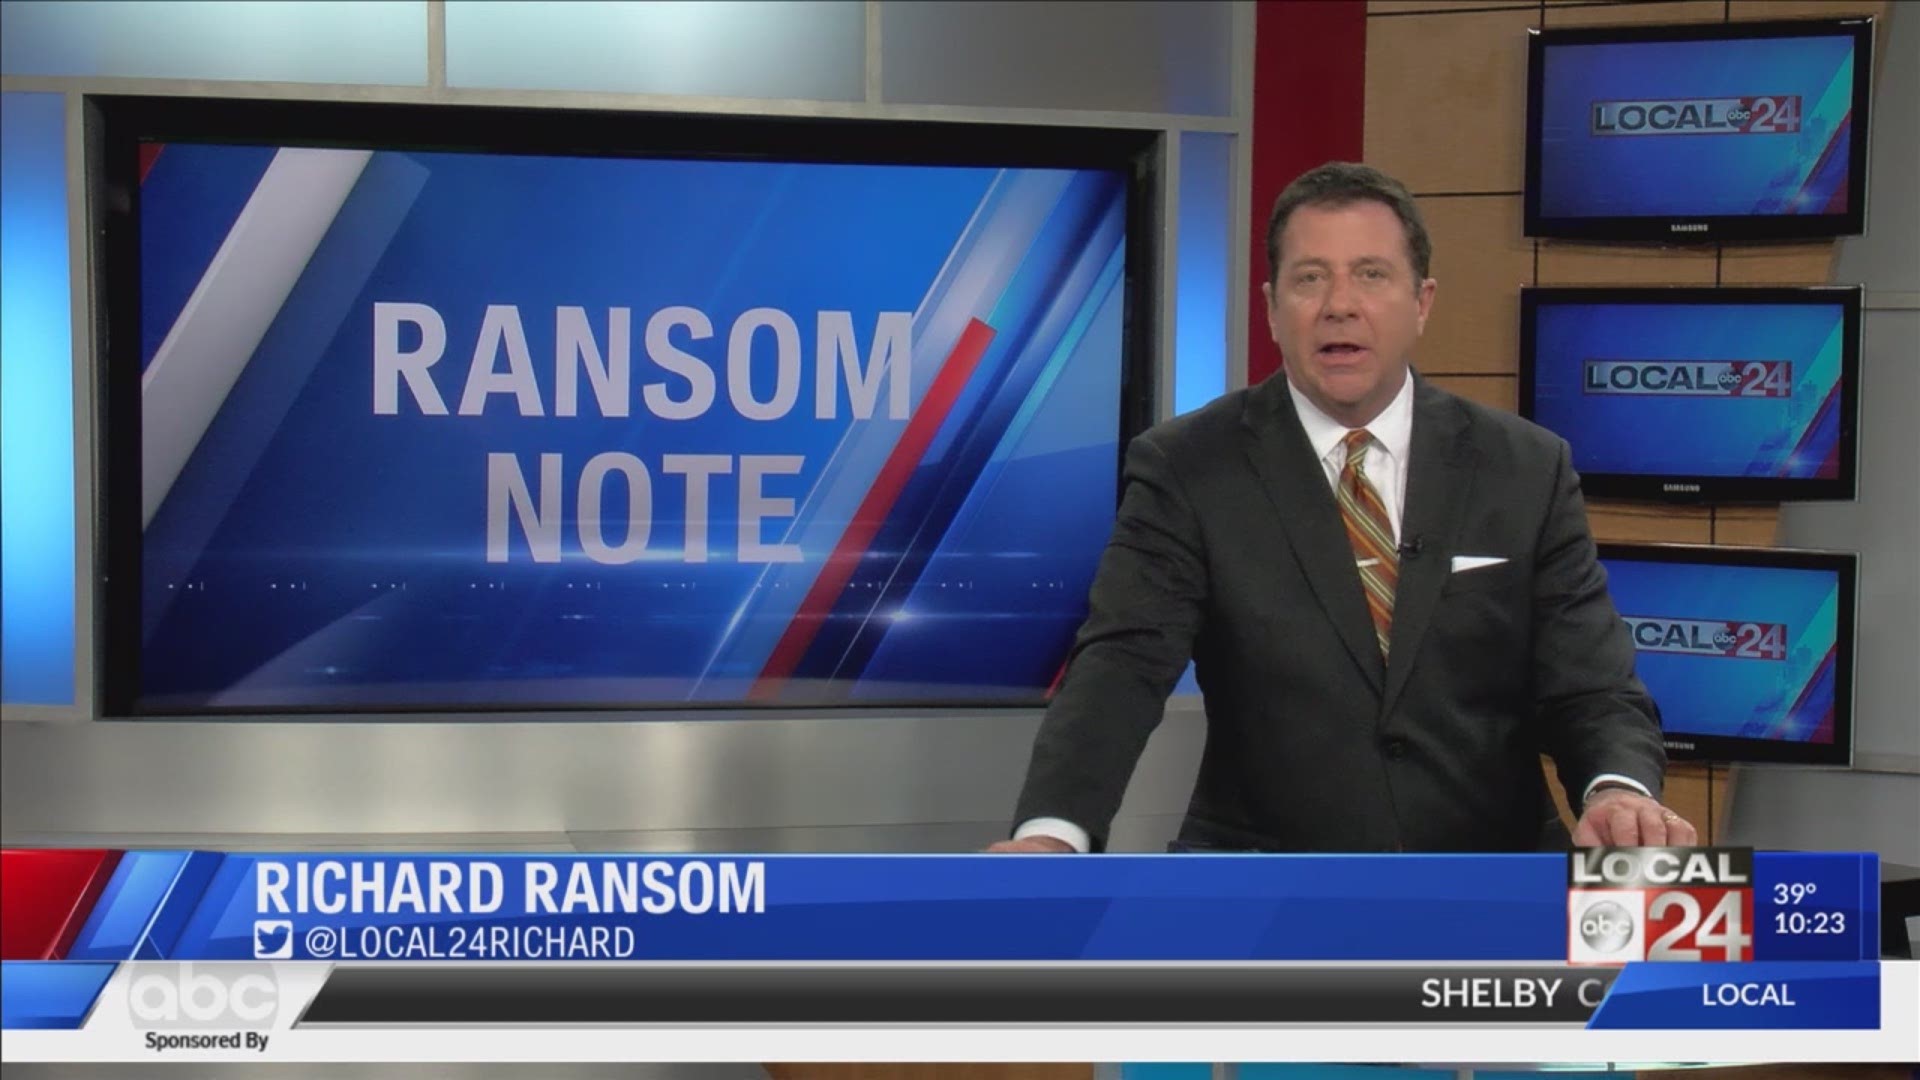 In Thursday's Ransom Note, Local 24 News Weekday Anchor Richard Ransom addresses the MLGW debate over whether to dump TVA as a power source.